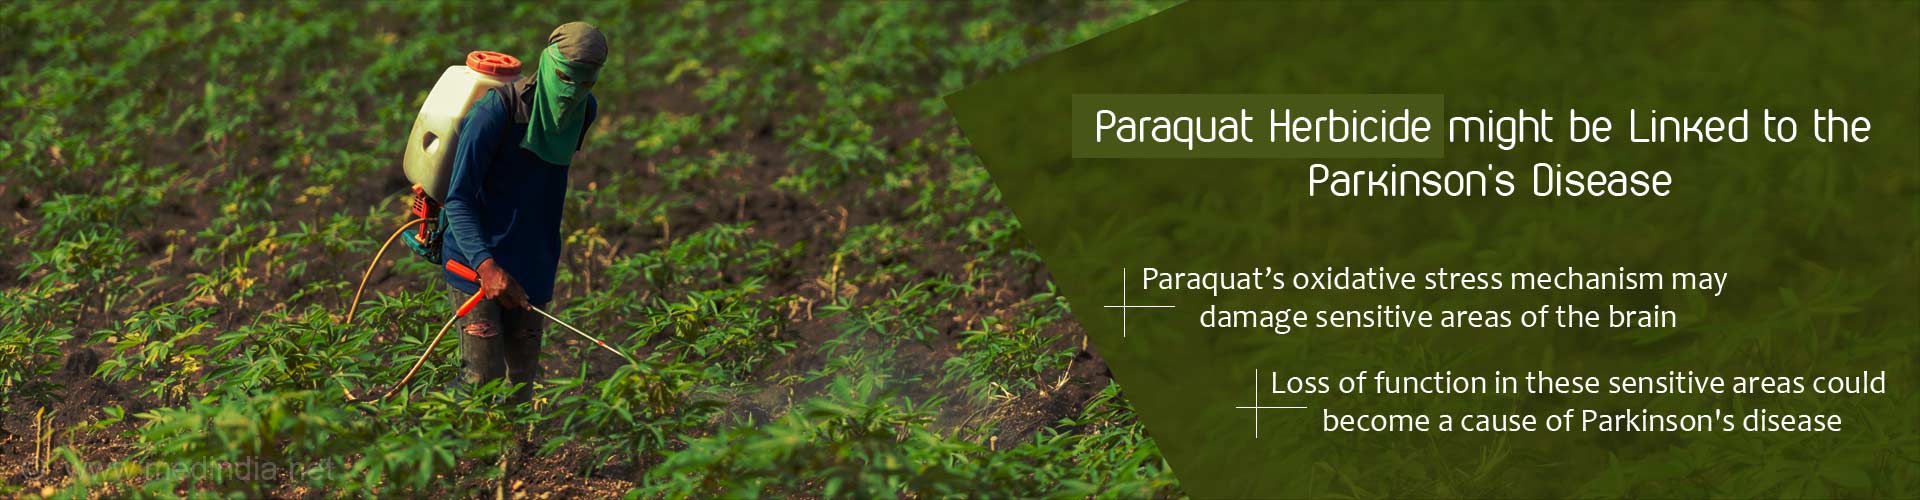 Paraquat herbicide might be linked to the Parkinson's Disease
- Paraquat's oxidative stress mechanism may damage sensitive areas of the brain
- Loss of function in these sensitive areas could become a cause of Parkinson's Disease